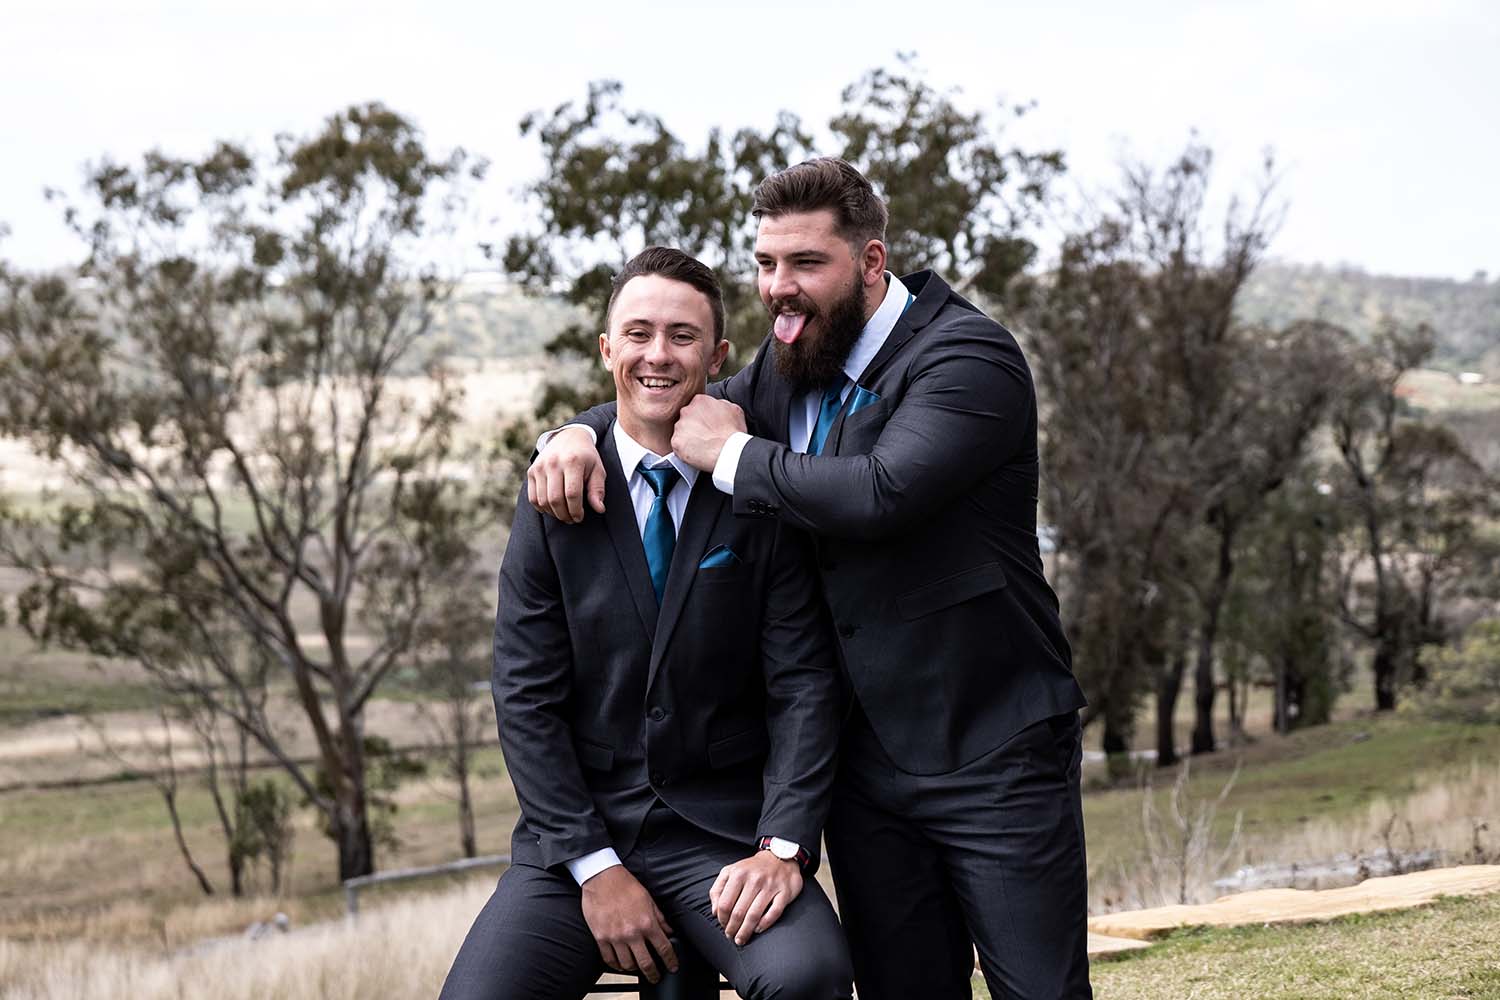 Wedding Photography - Groom and best man